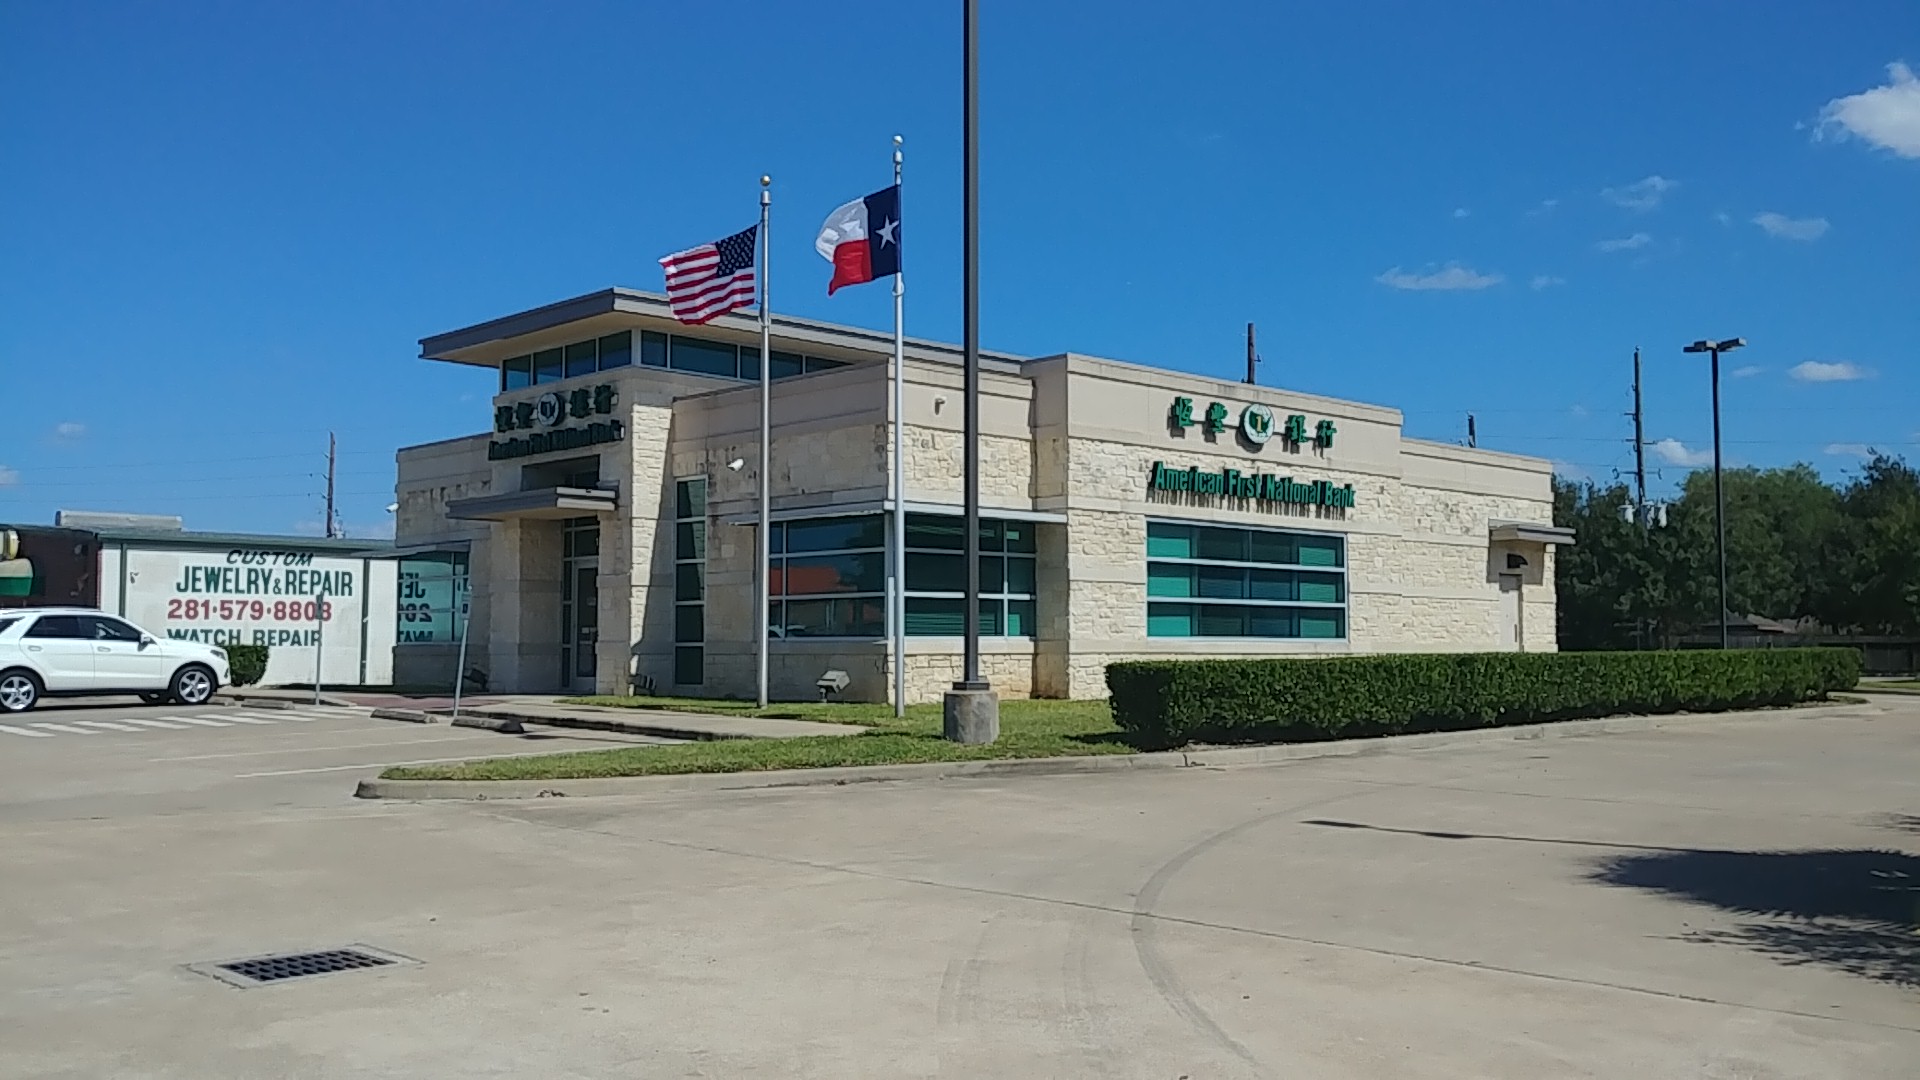 American First National Bank - Katy branch